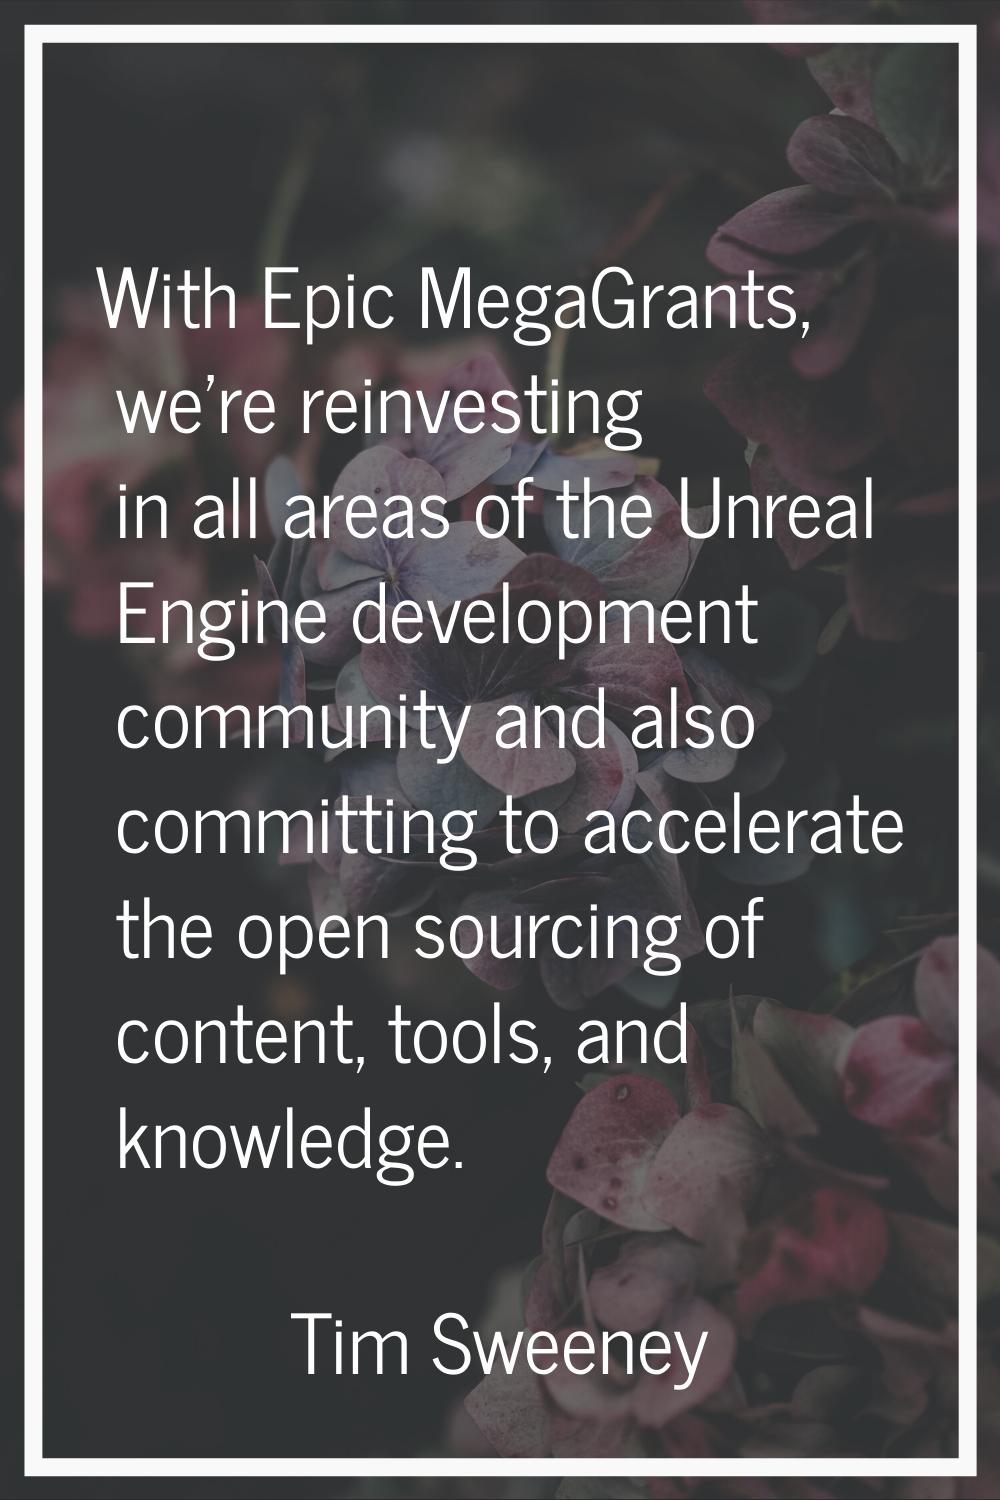 With Epic MegaGrants, we're reinvesting in all areas of the Unreal Engine development community and